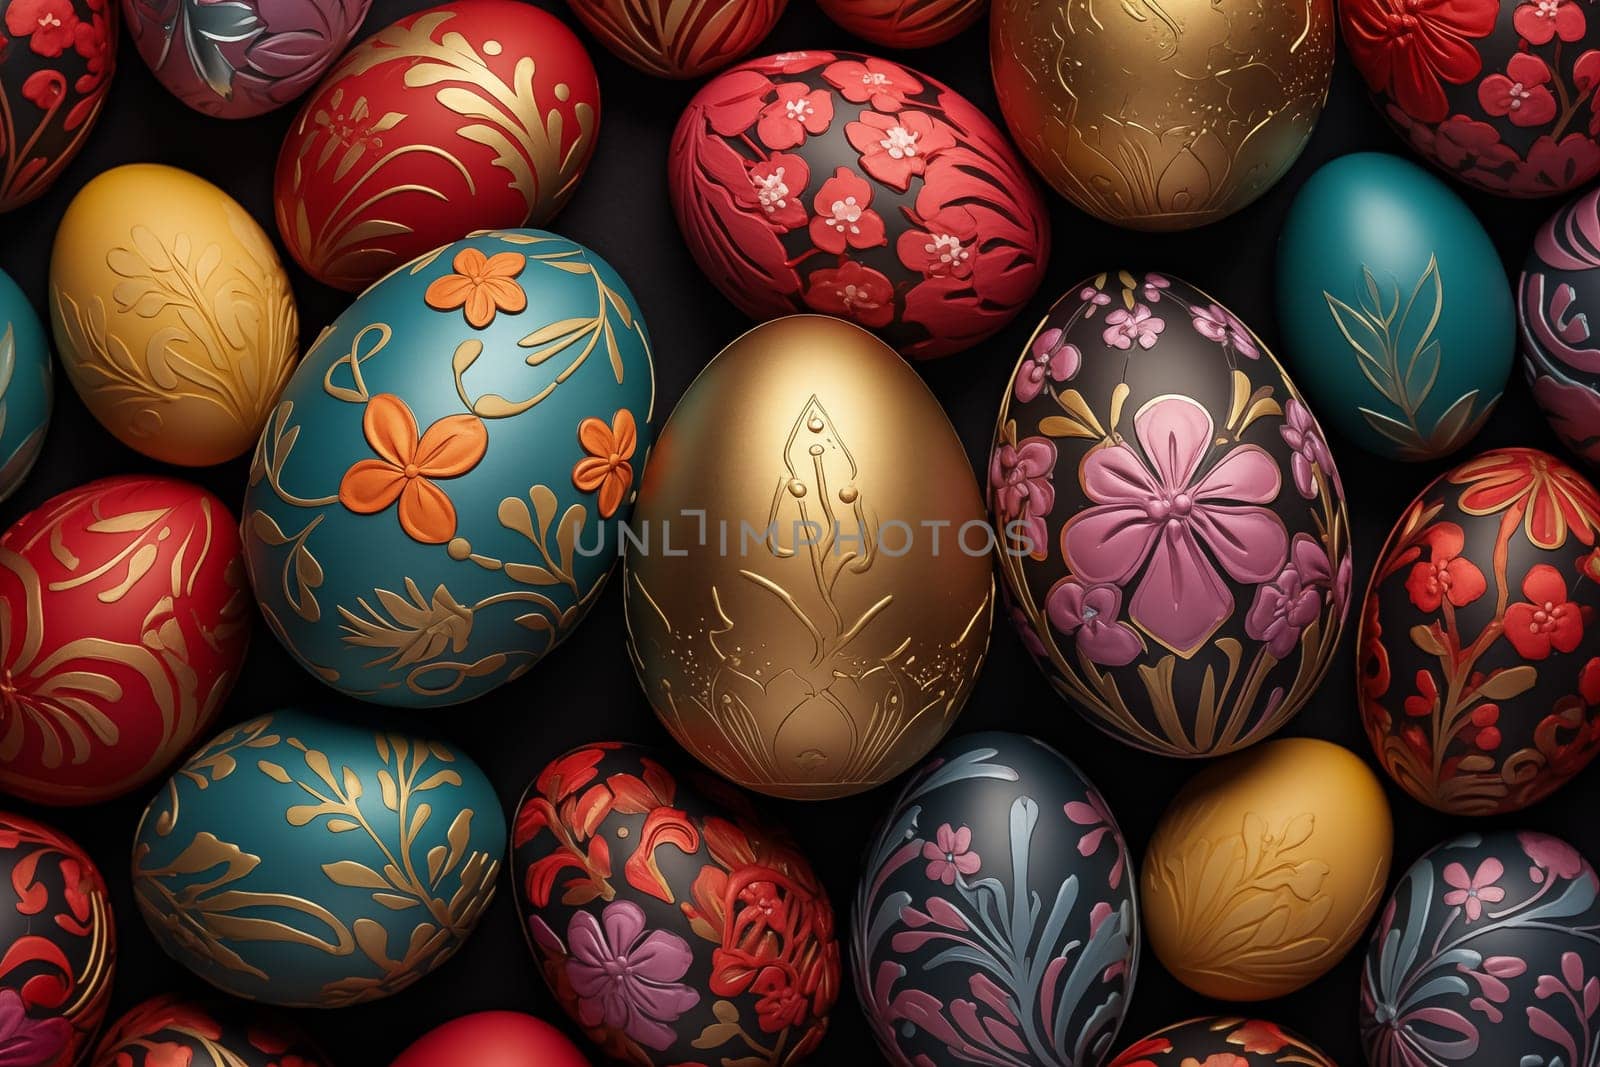 Collection of Precisely arranged Eggs with Floral Patterns. Multicolored Easter Background by Nadtochiy